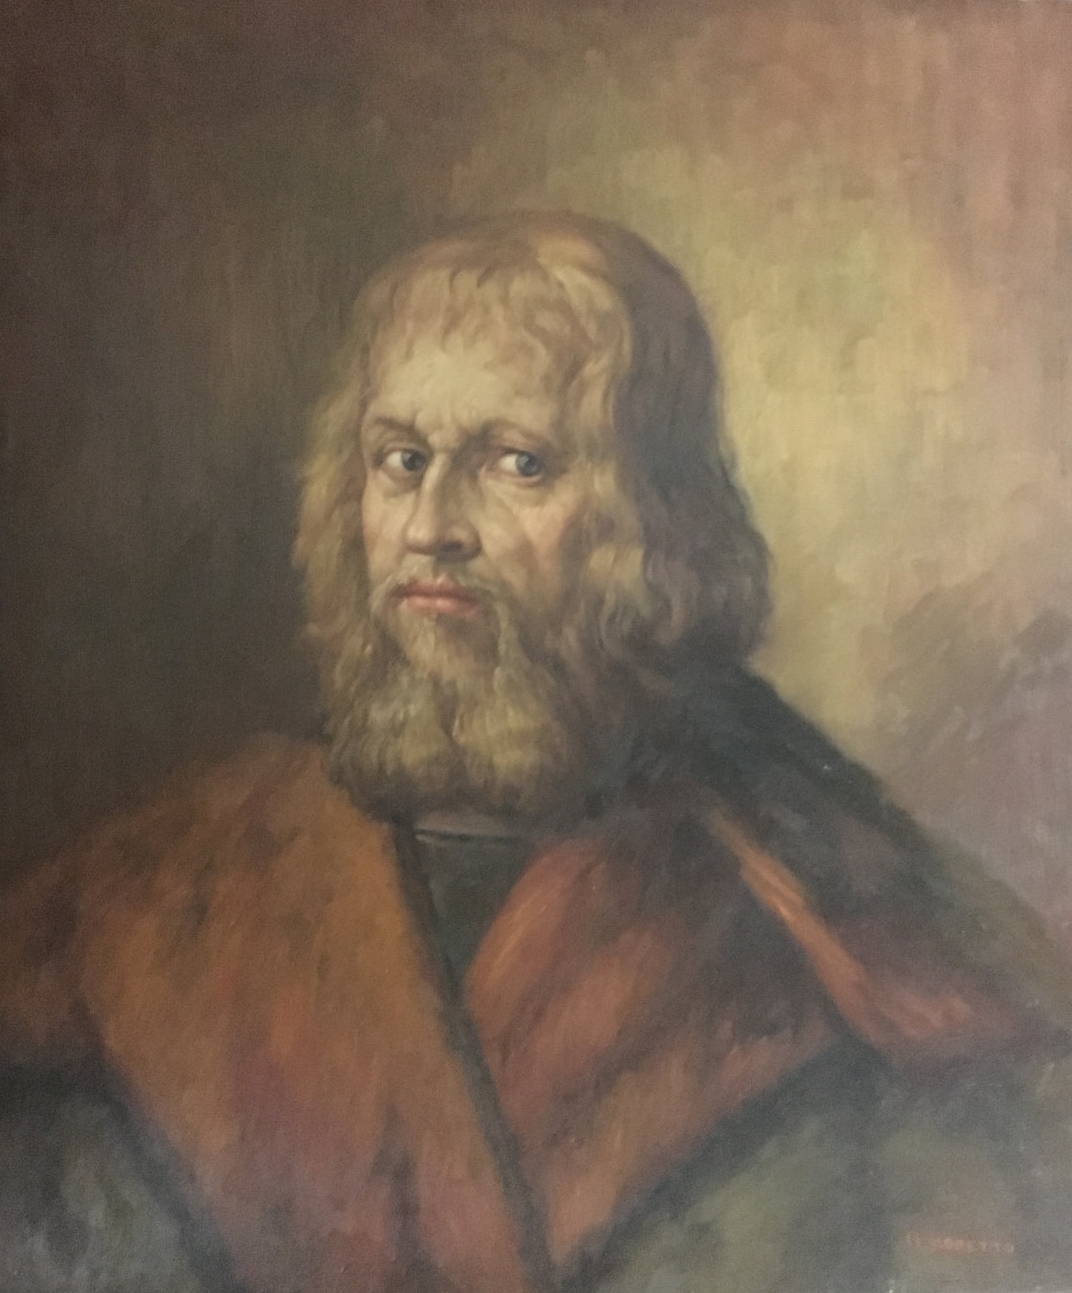 Vintage Painting of A Bearded Man